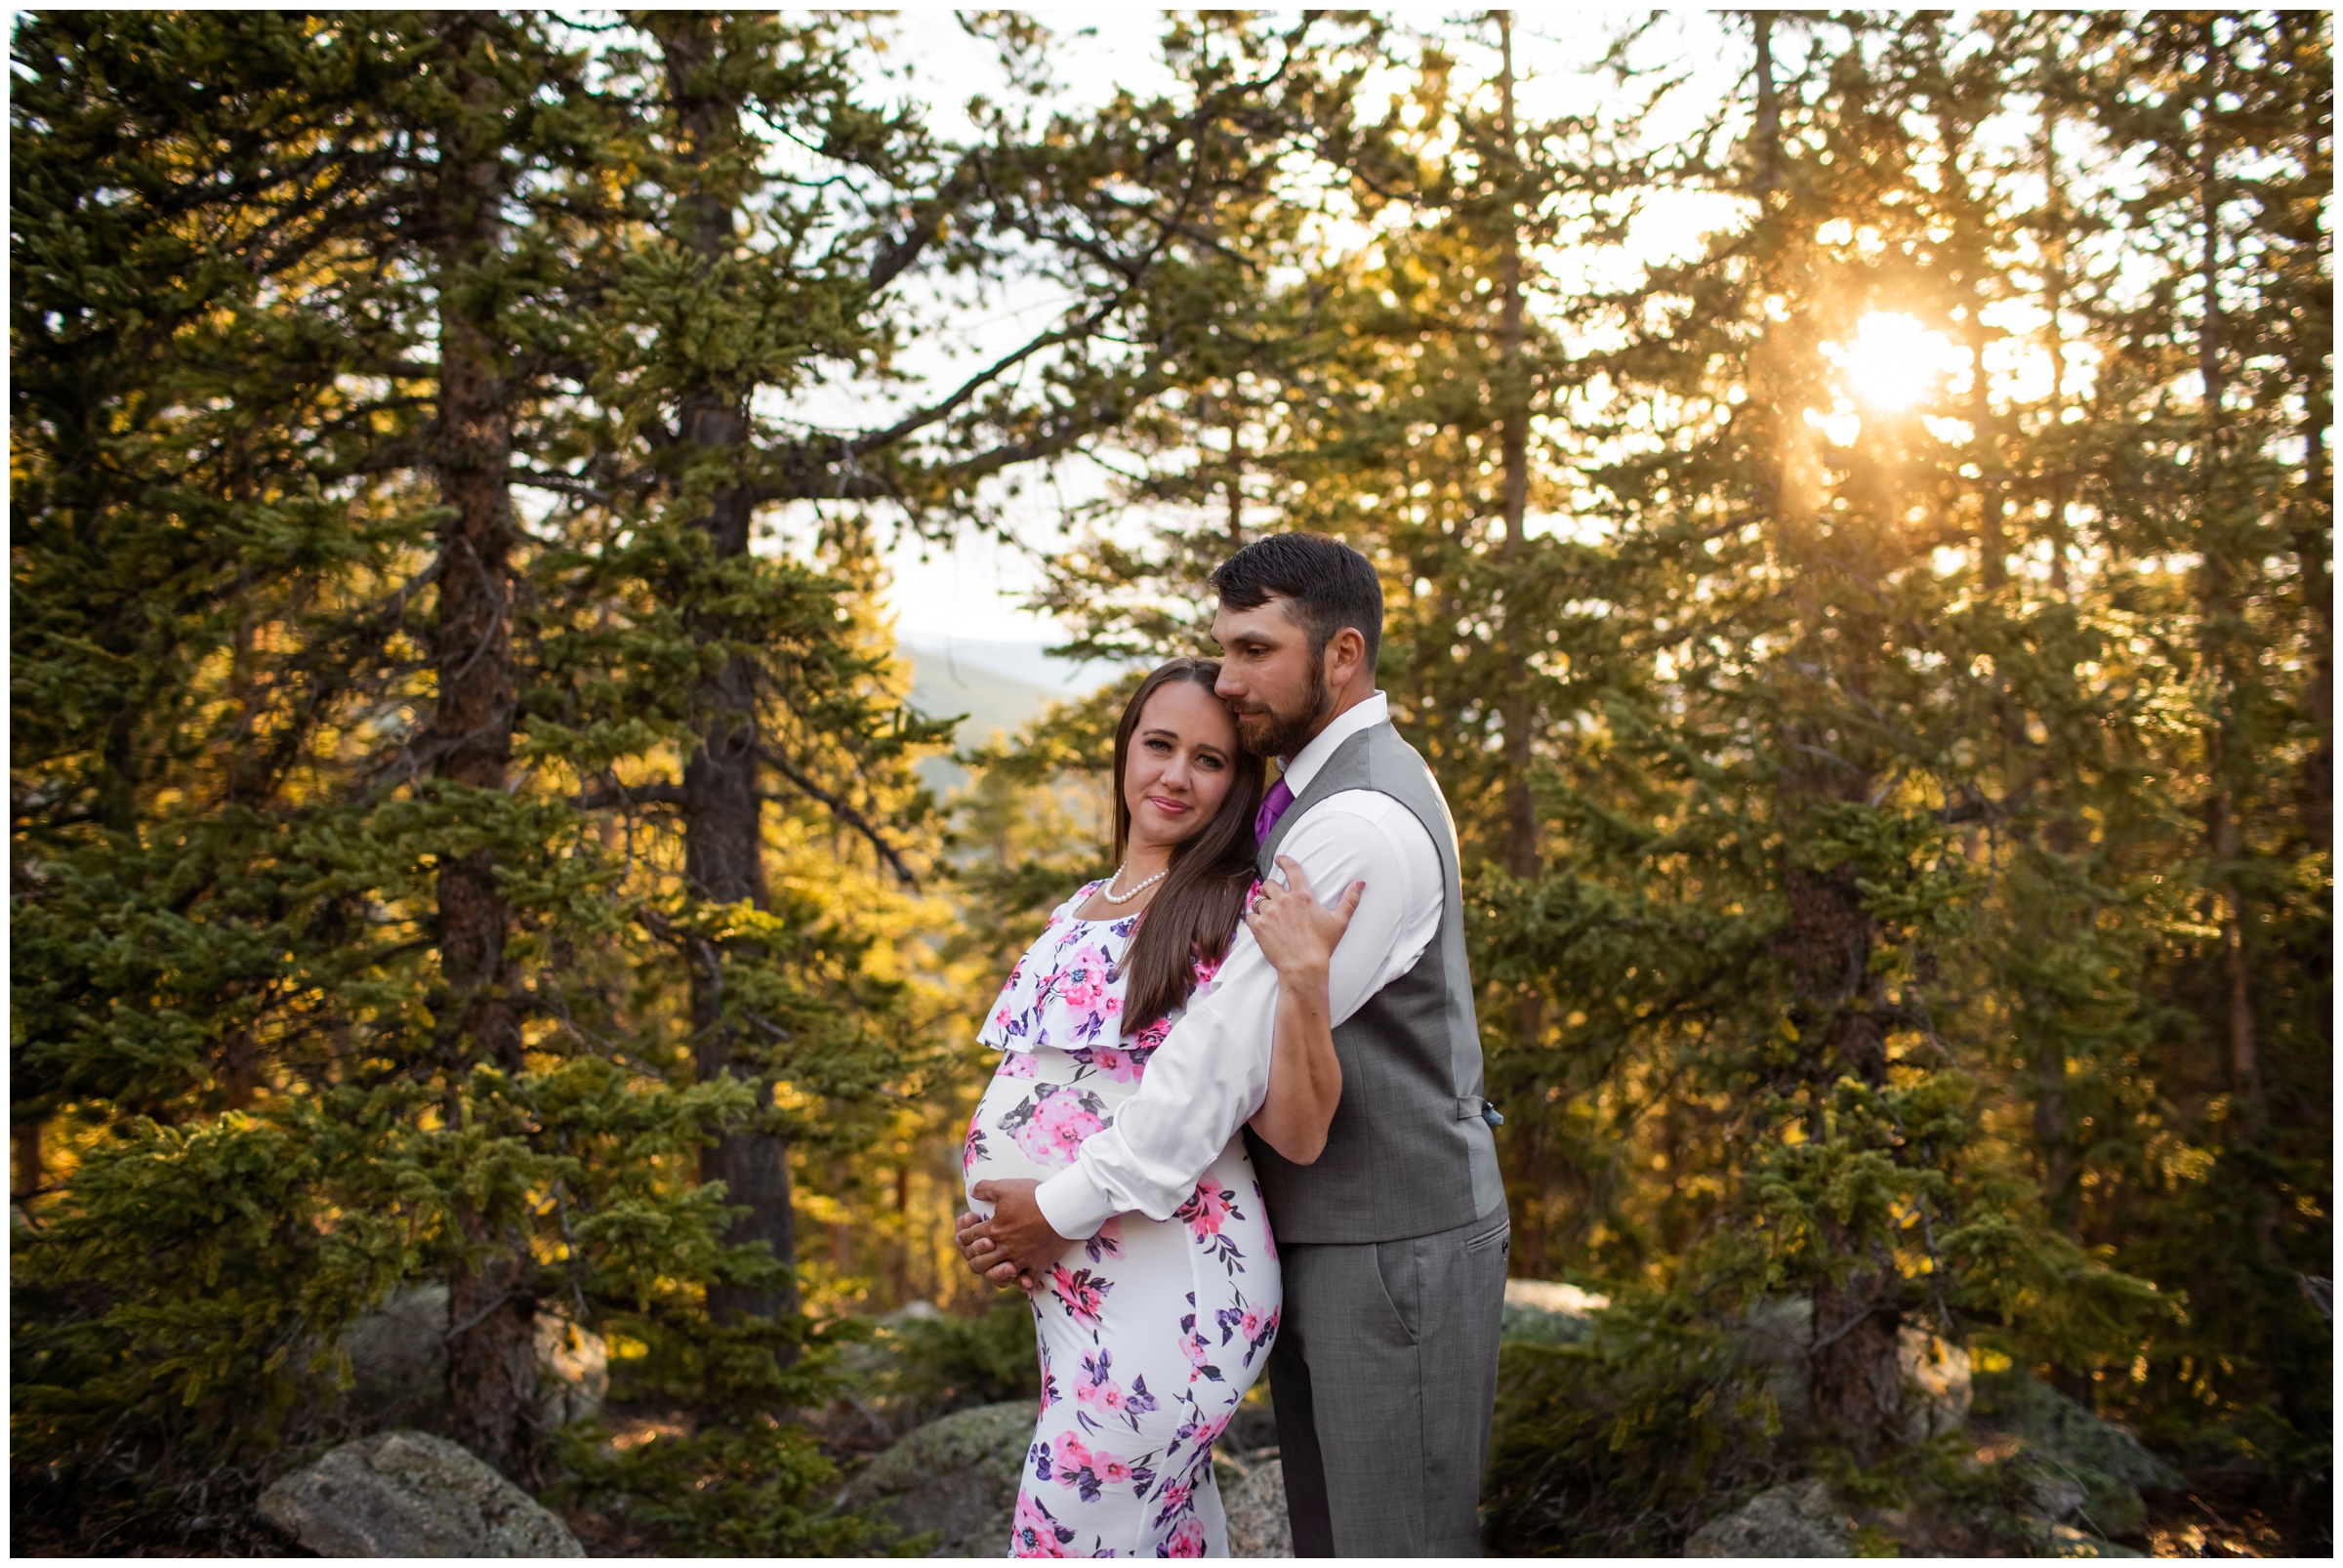 Forest maternity photos inspiration at echo lake in the Colorado mountains 